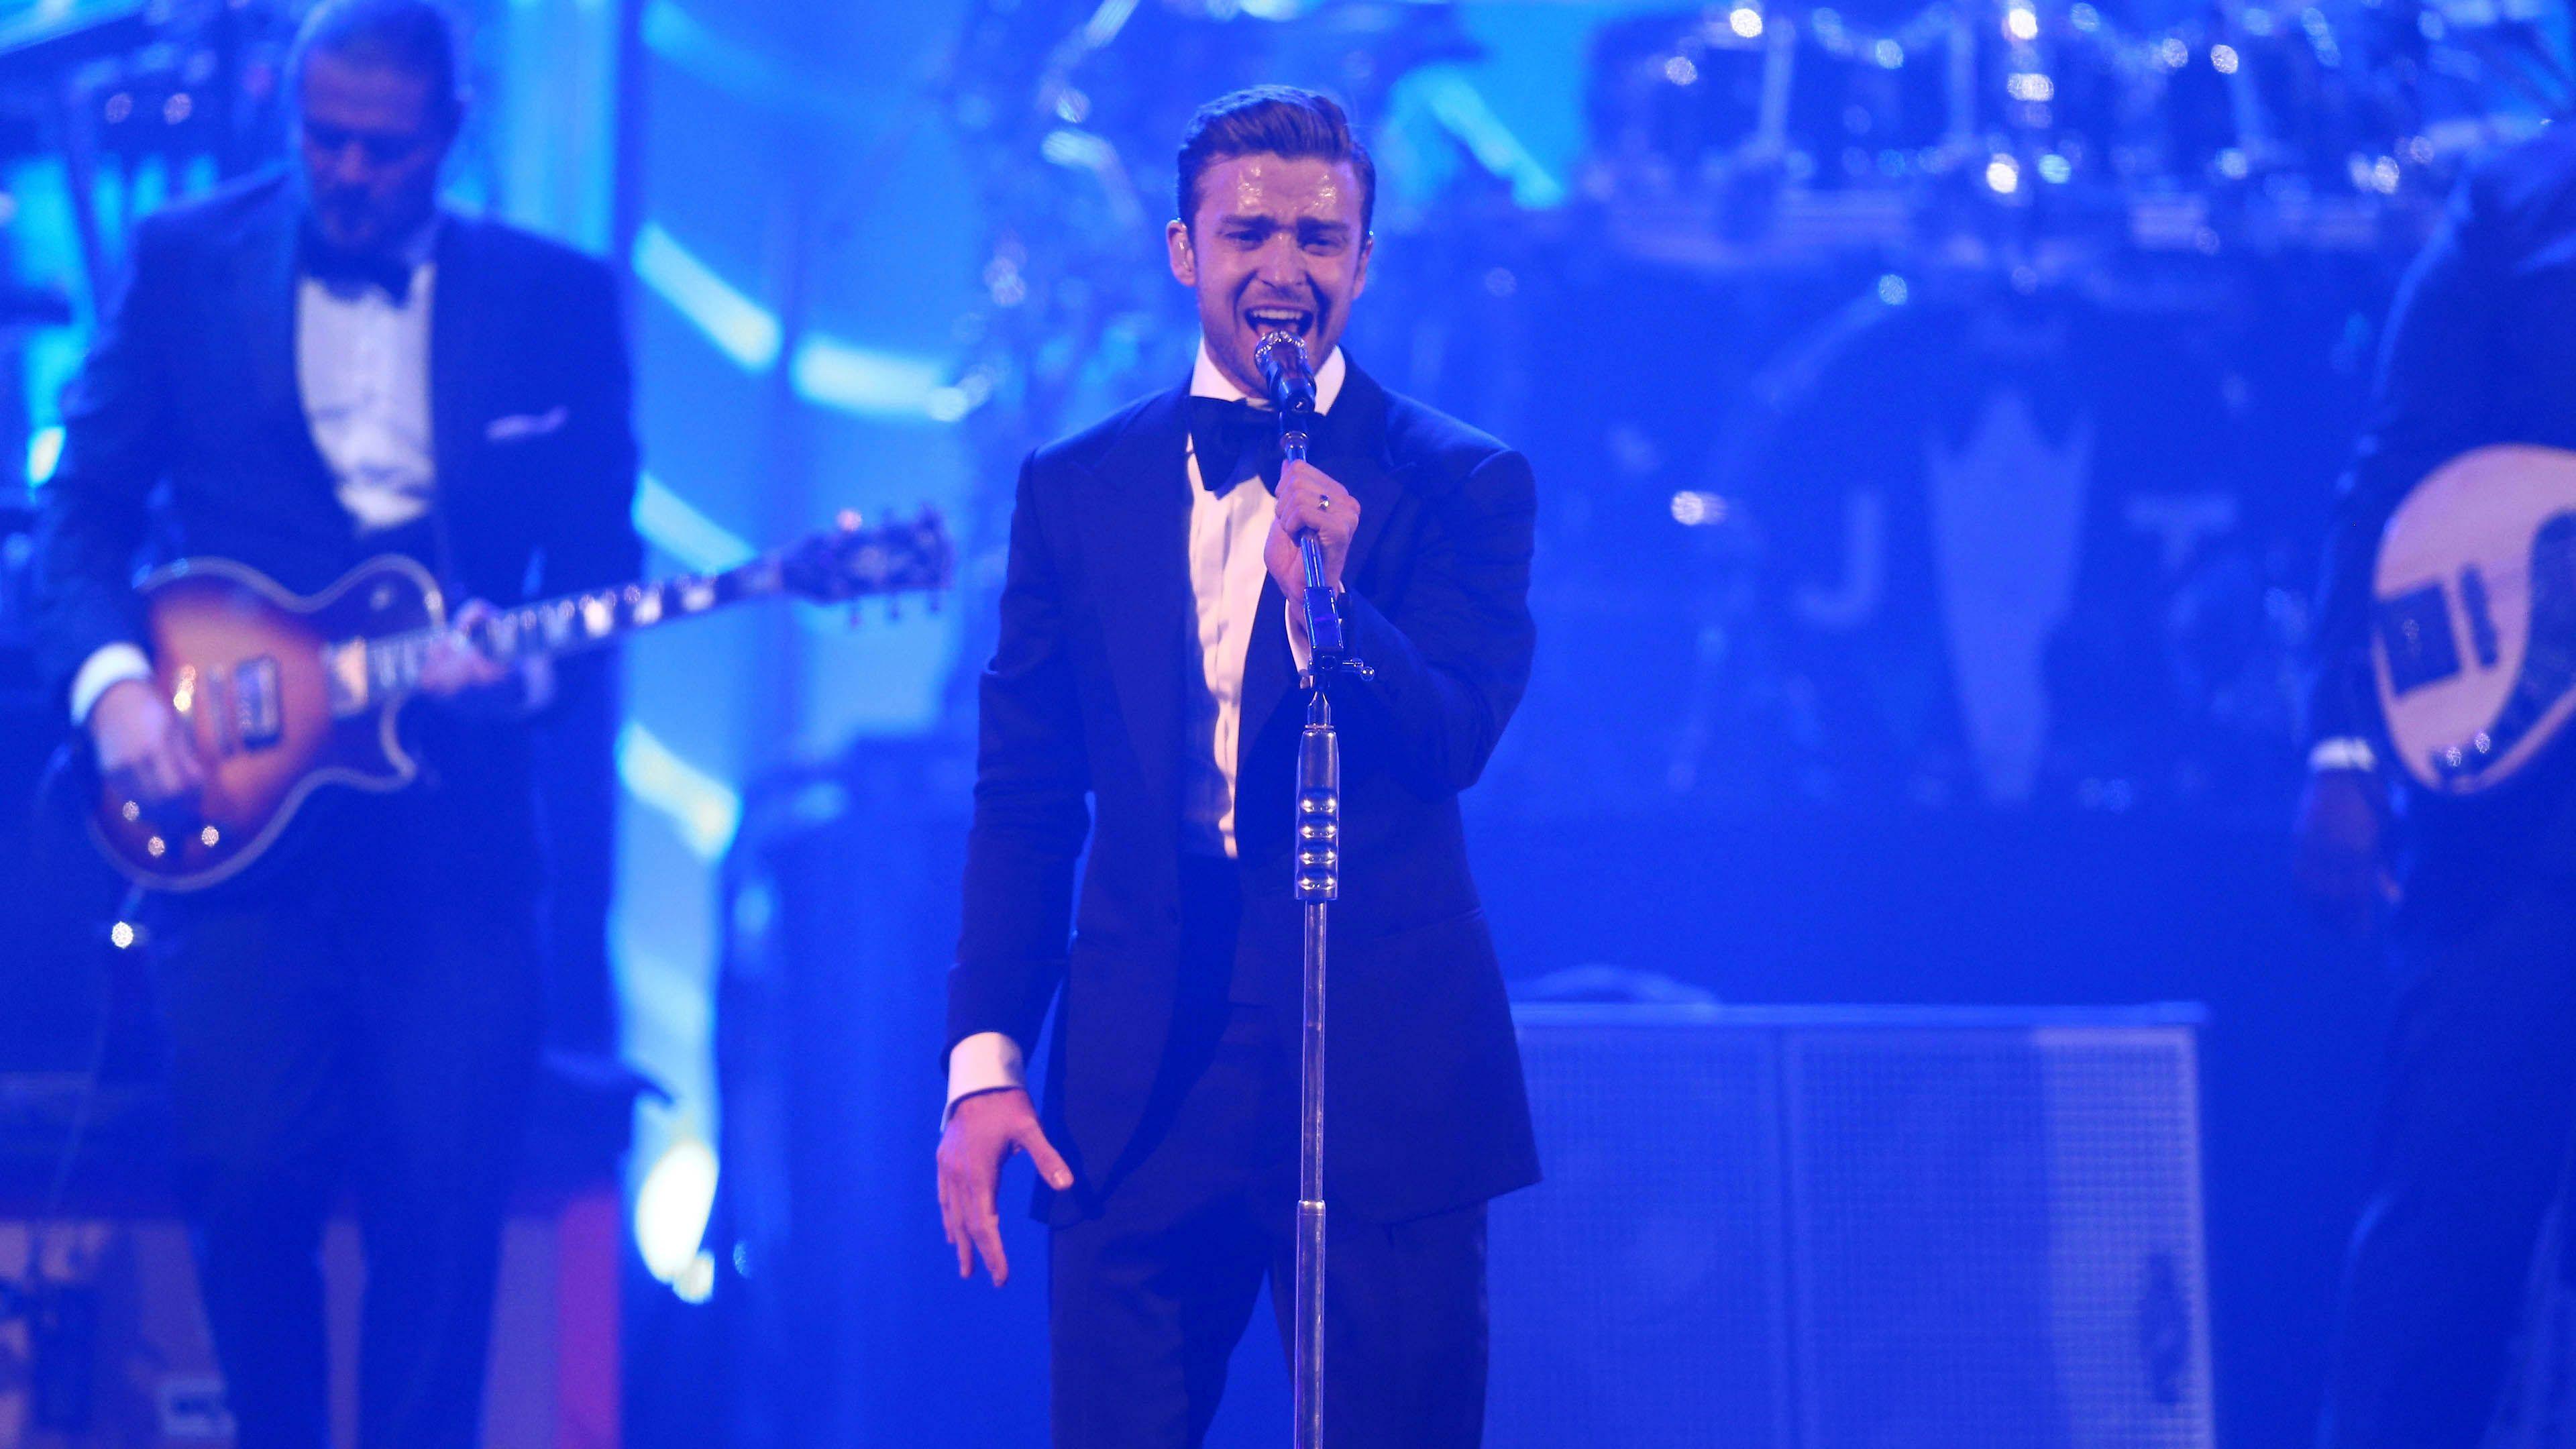 Justin Timberlake Suit And Tie Live 16 9 Ultra